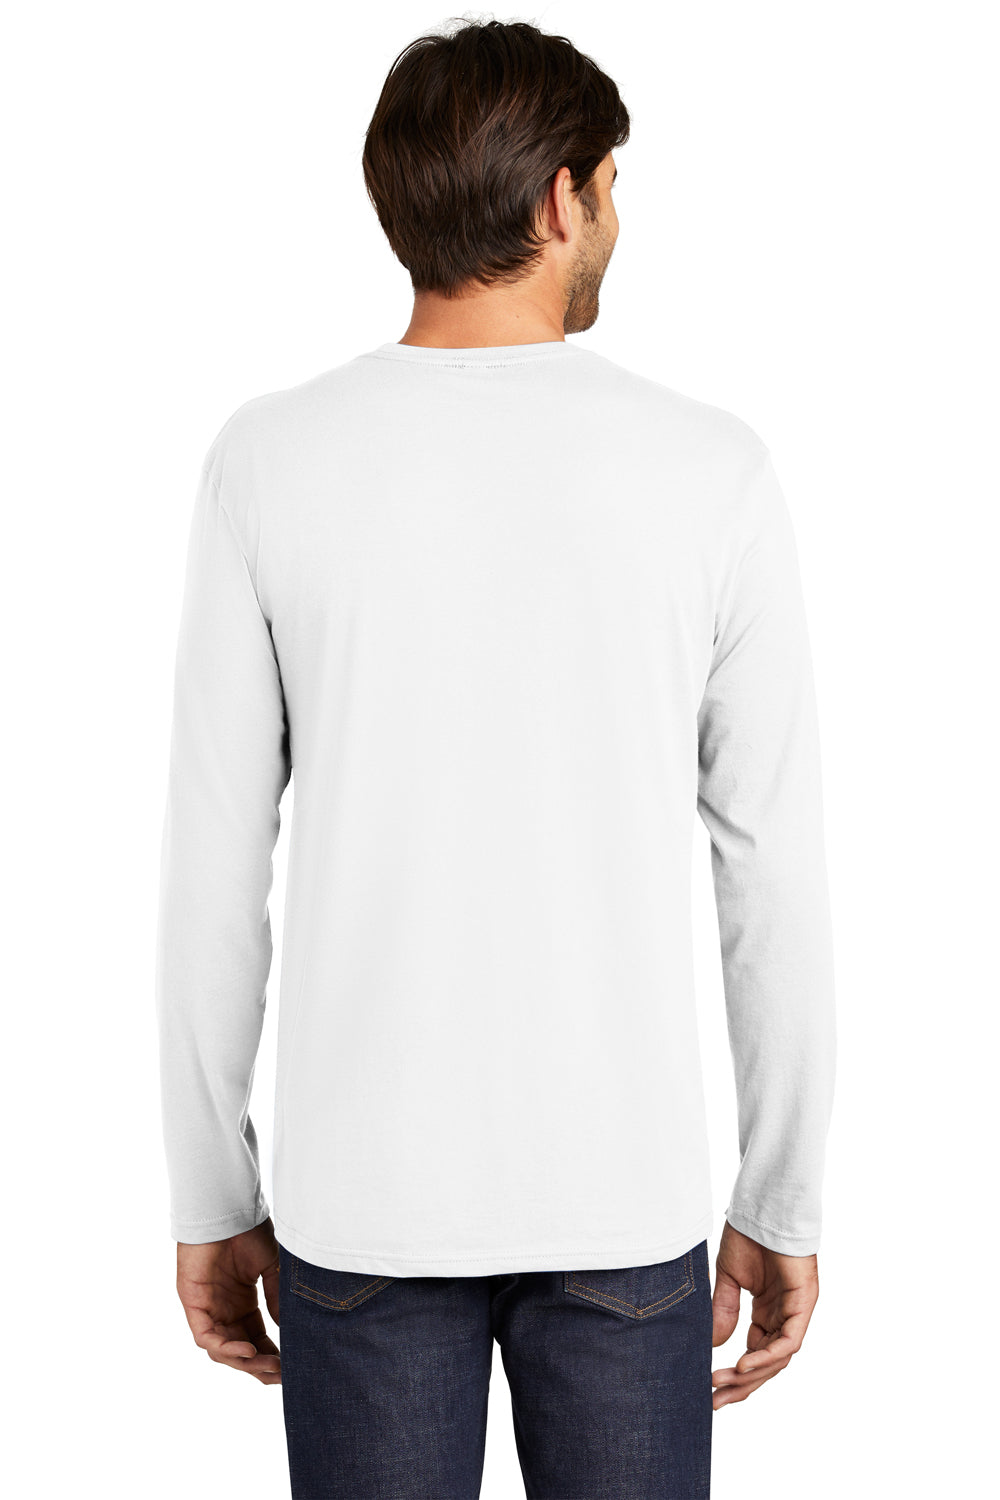 District DT105 Mens Perfect Weight Long Sleeve Crewneck T-Shirt White Back